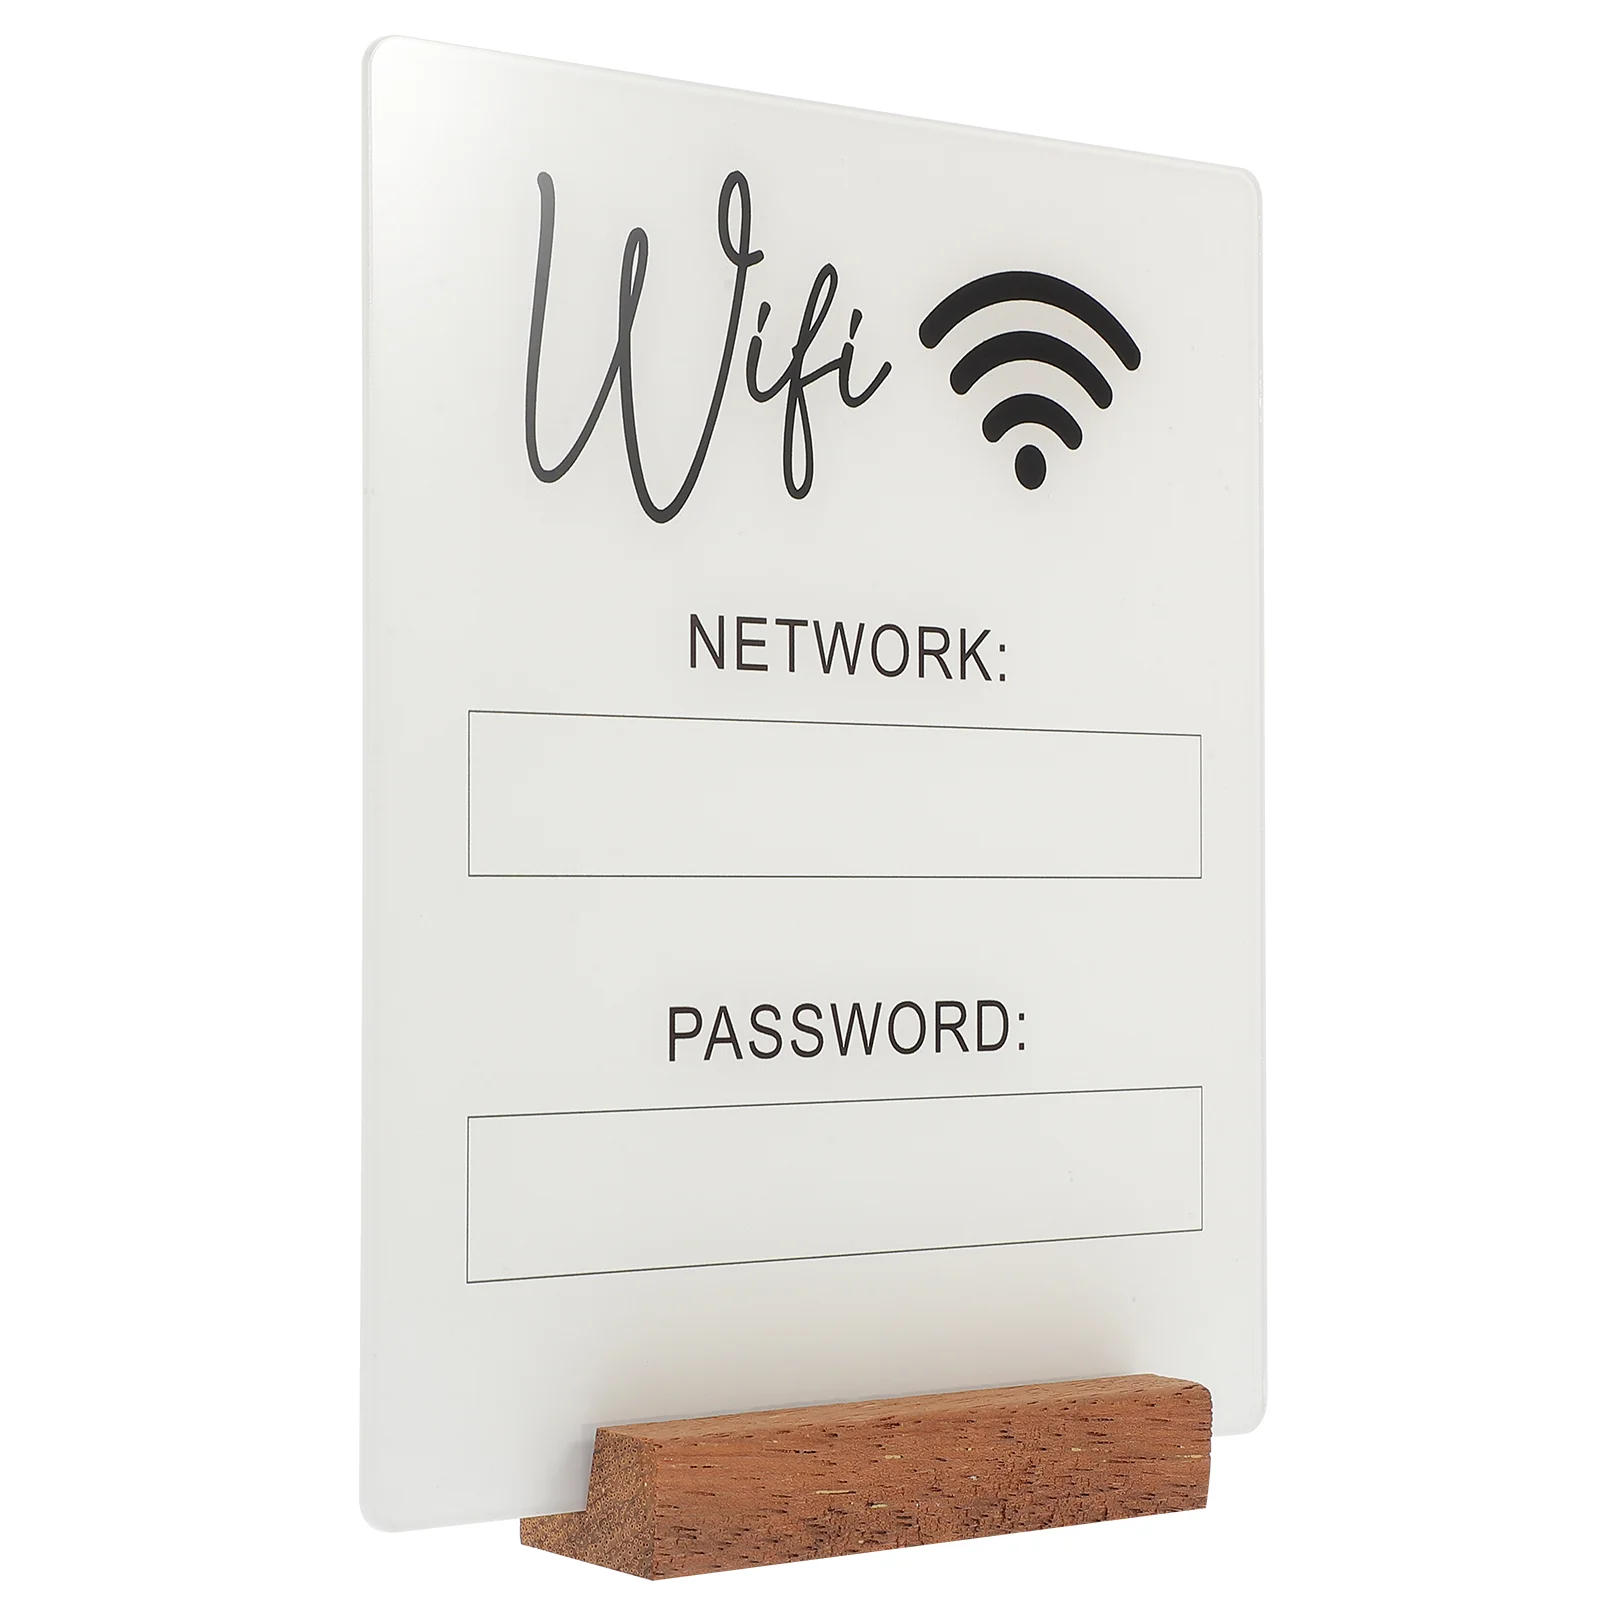 Wifi Password Sign Acrylic Reminder for Guest Room Desk Hotel Guests Stand Office Decor new anime 86 eighty six figure undertaker vladilena milize anju emma cosplay acrylic stand model plate desk decor standing sign